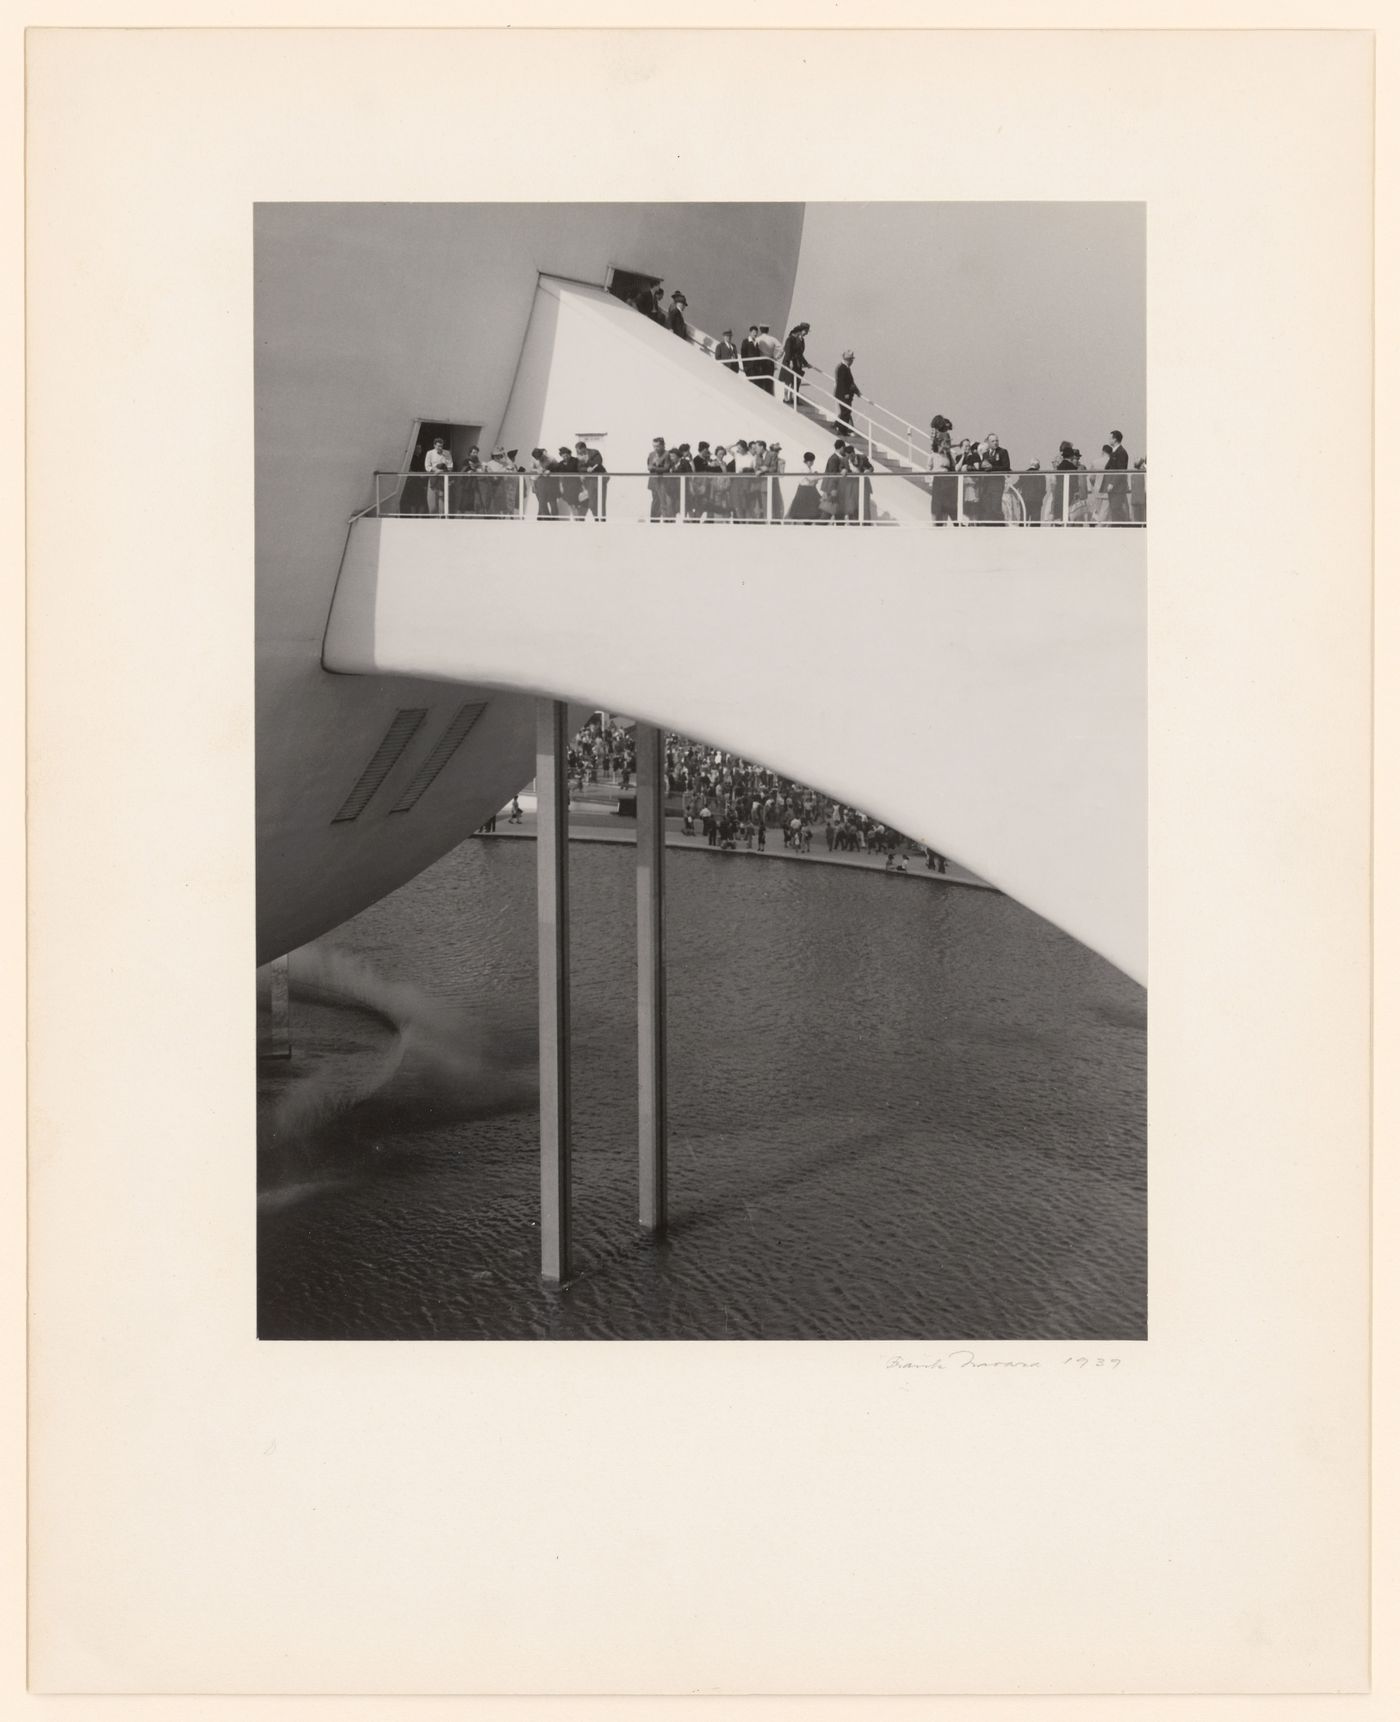 New York World's Fair (1939-1940): Close-up view of crowds moving from the Trylon into the Perisphere